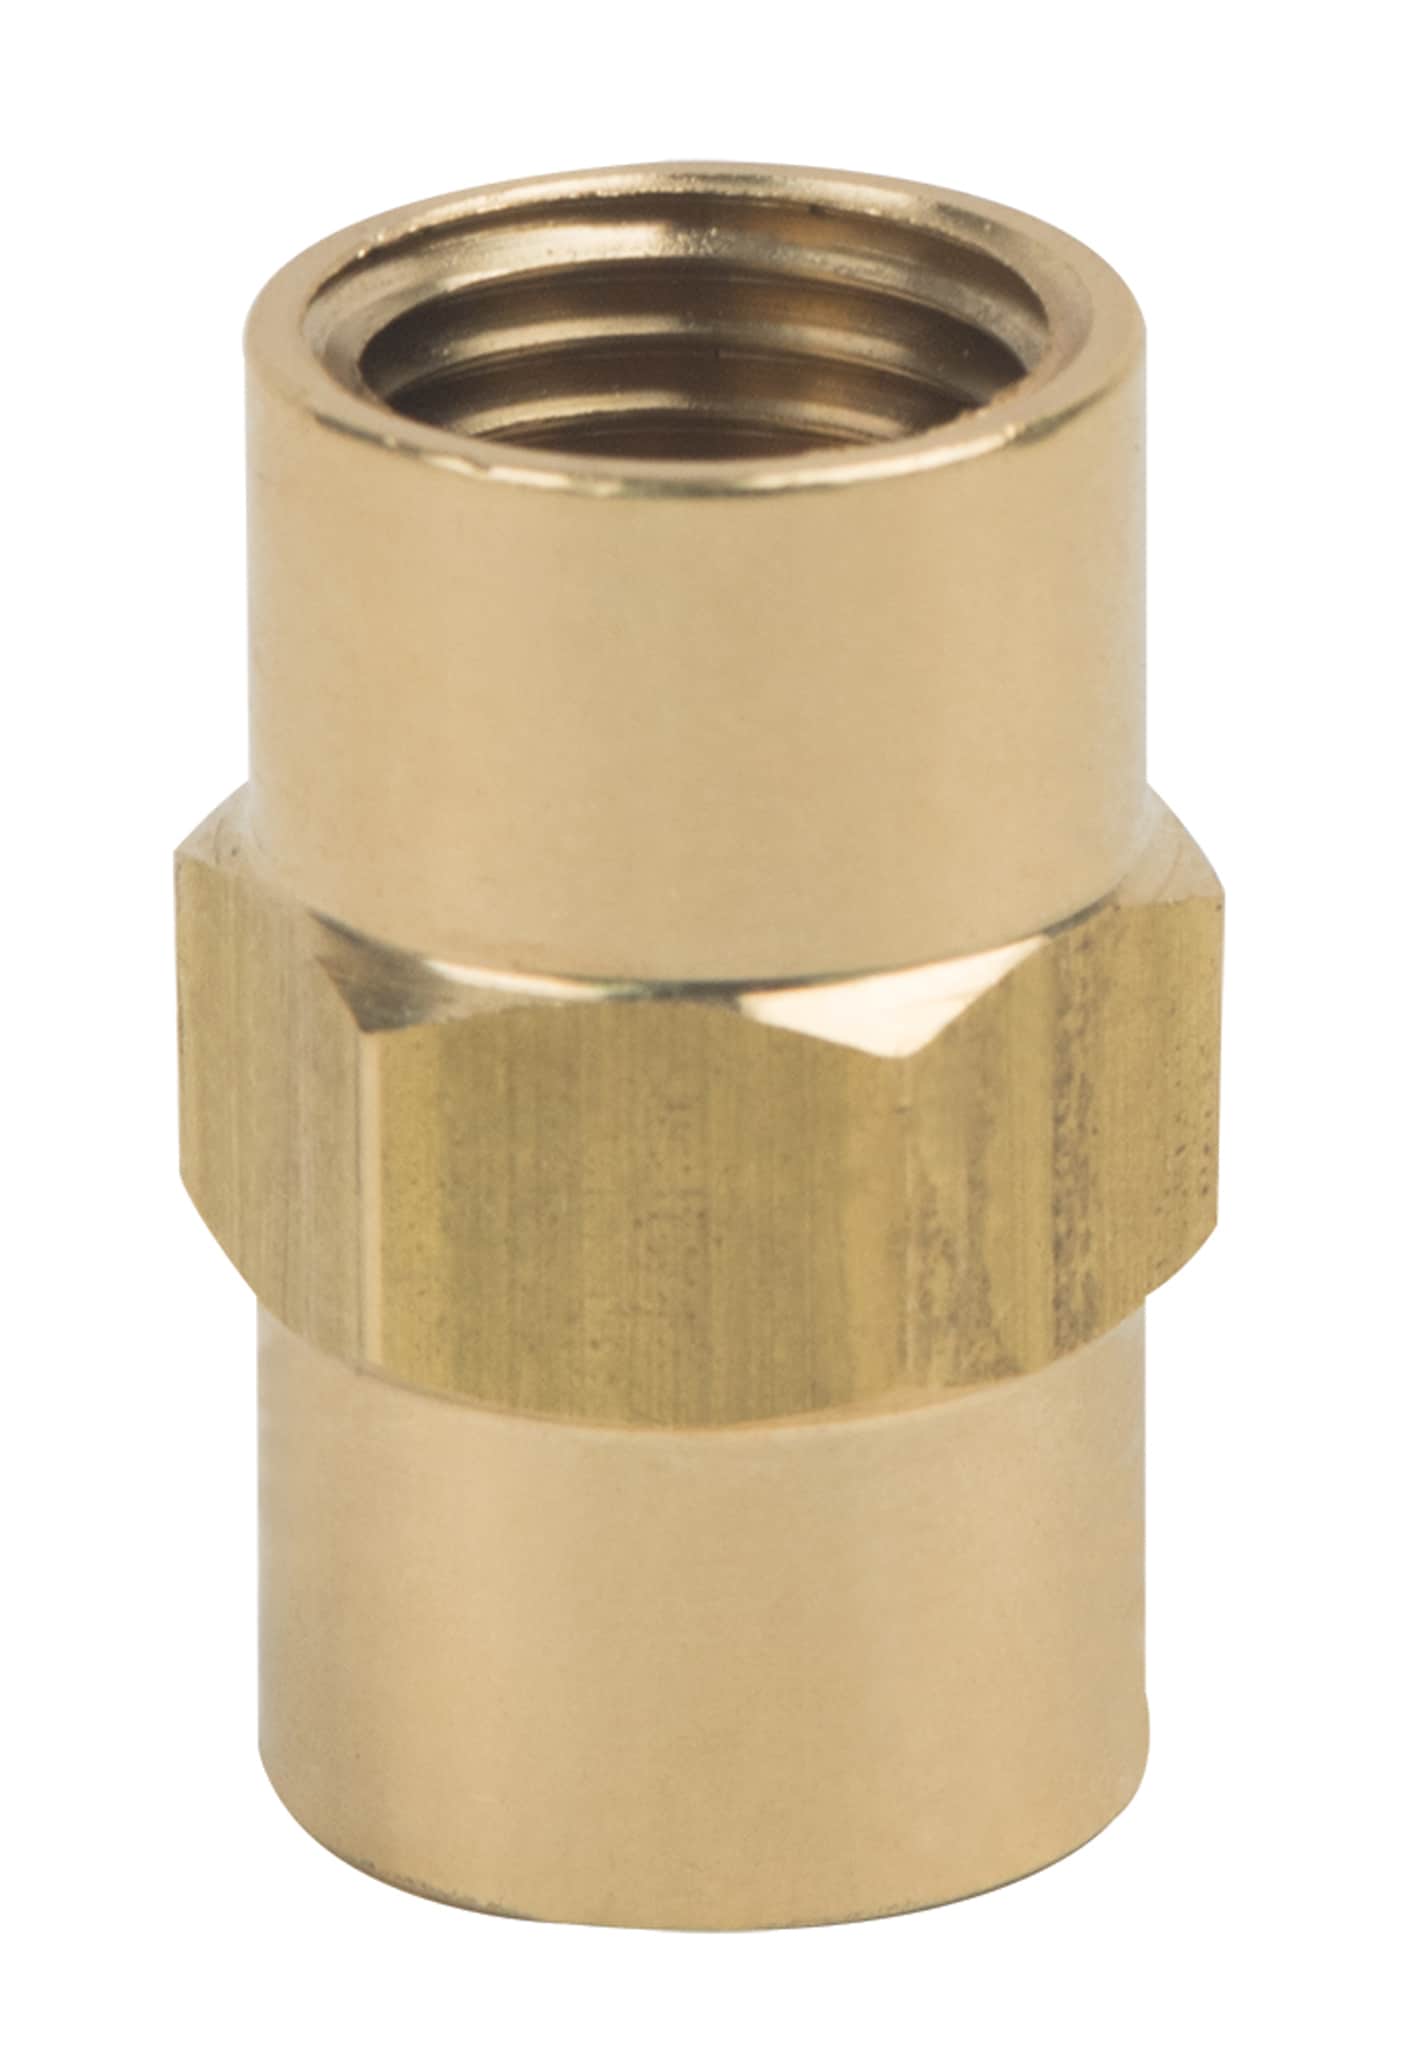 BrassCraft 1/4-in x 1/4-in Compression Coupling Elbow Fitting in